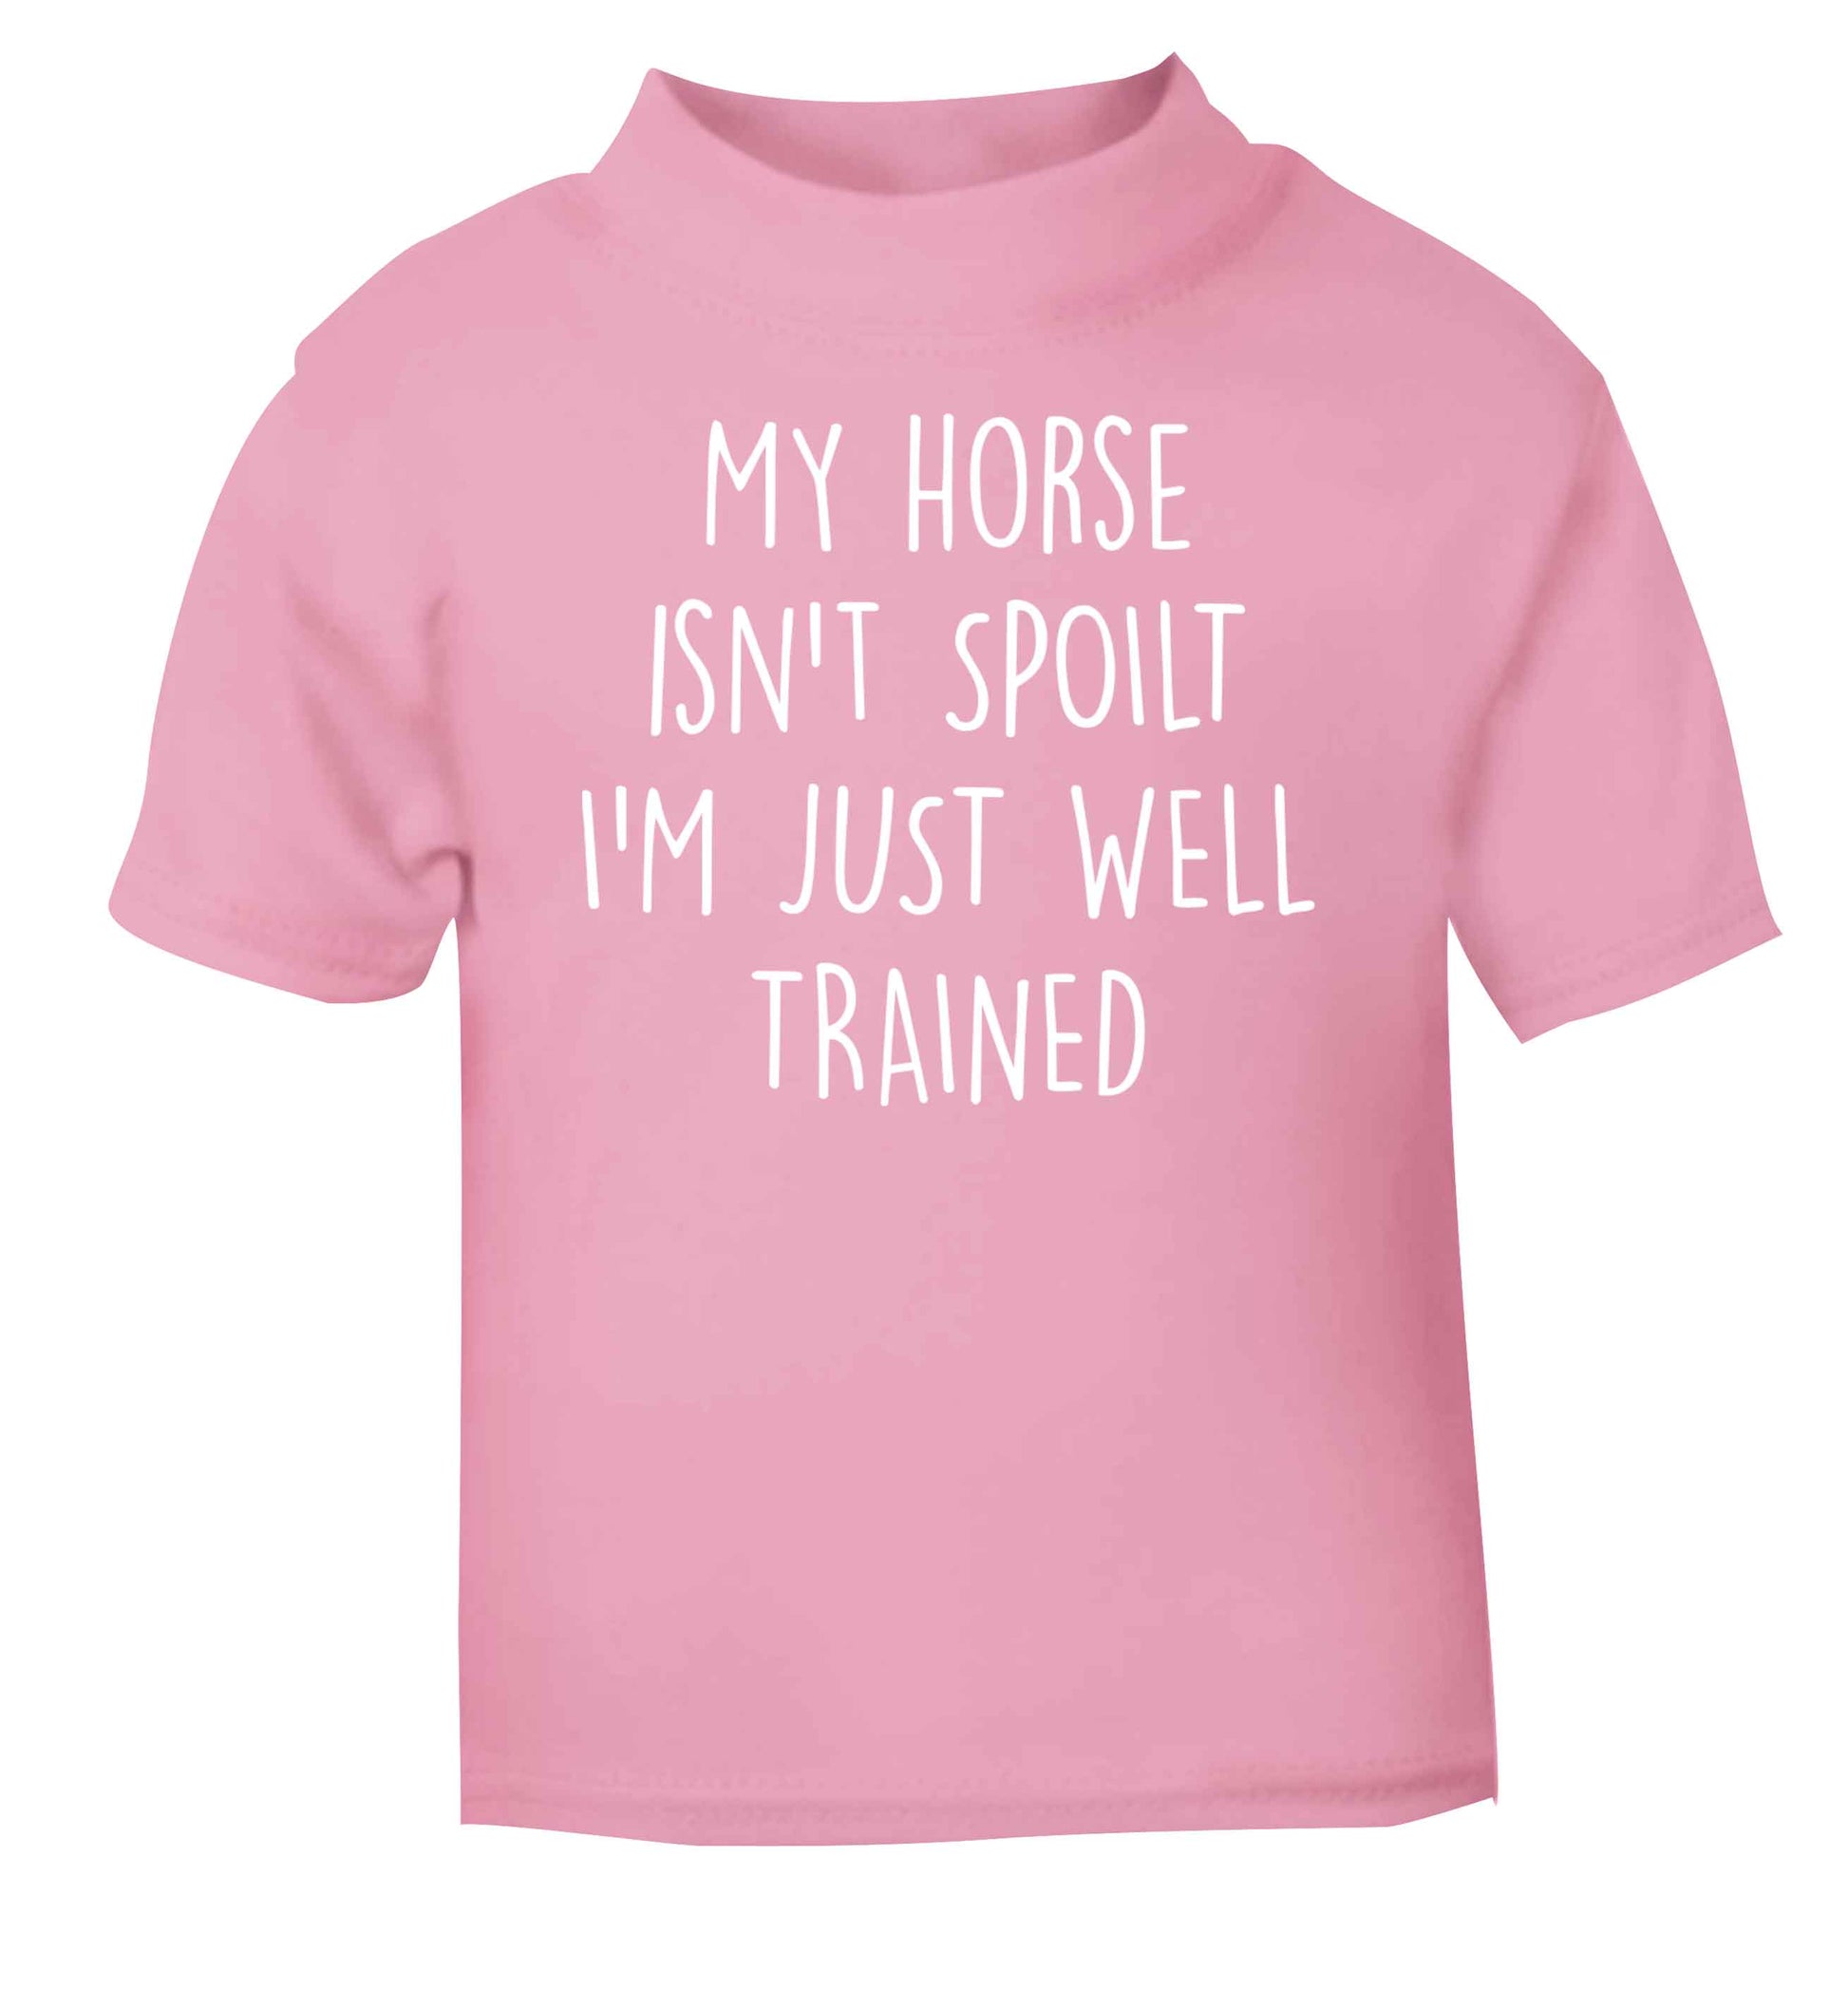 My horse isn't spoilt I'm just well trained light pink baby toddler Tshirt 2 Years